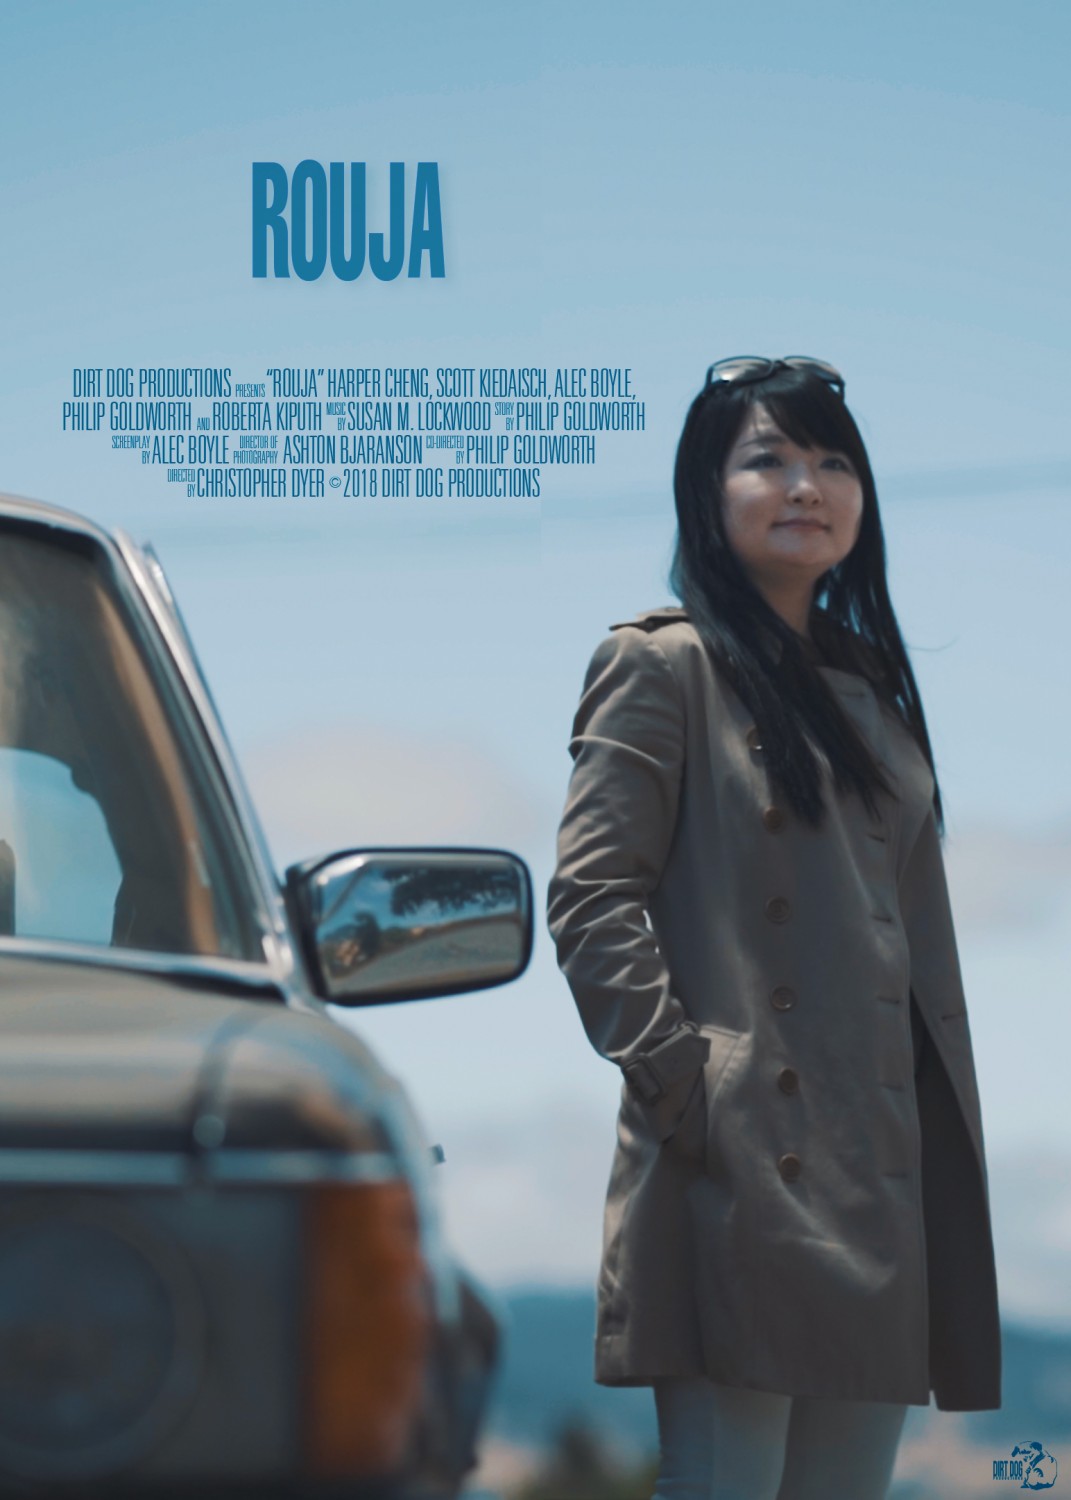 Extra Large Movie Poster Image for Rouja